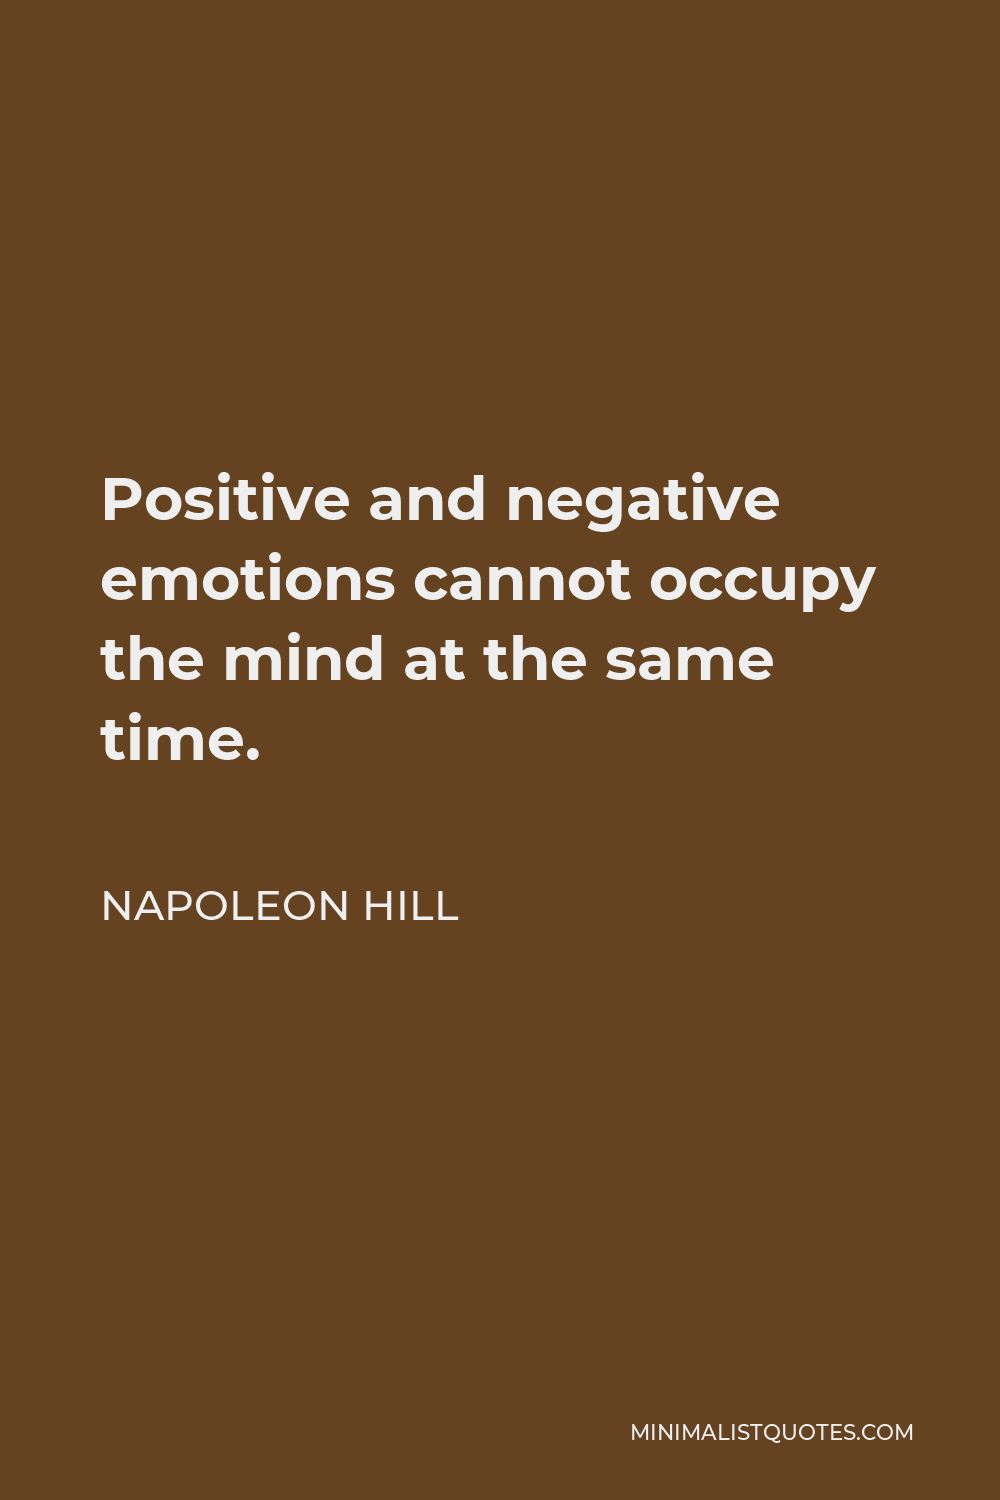 Napoleon Hill Quote - Positive and negative emotions cannot occupy the mind at the same time.